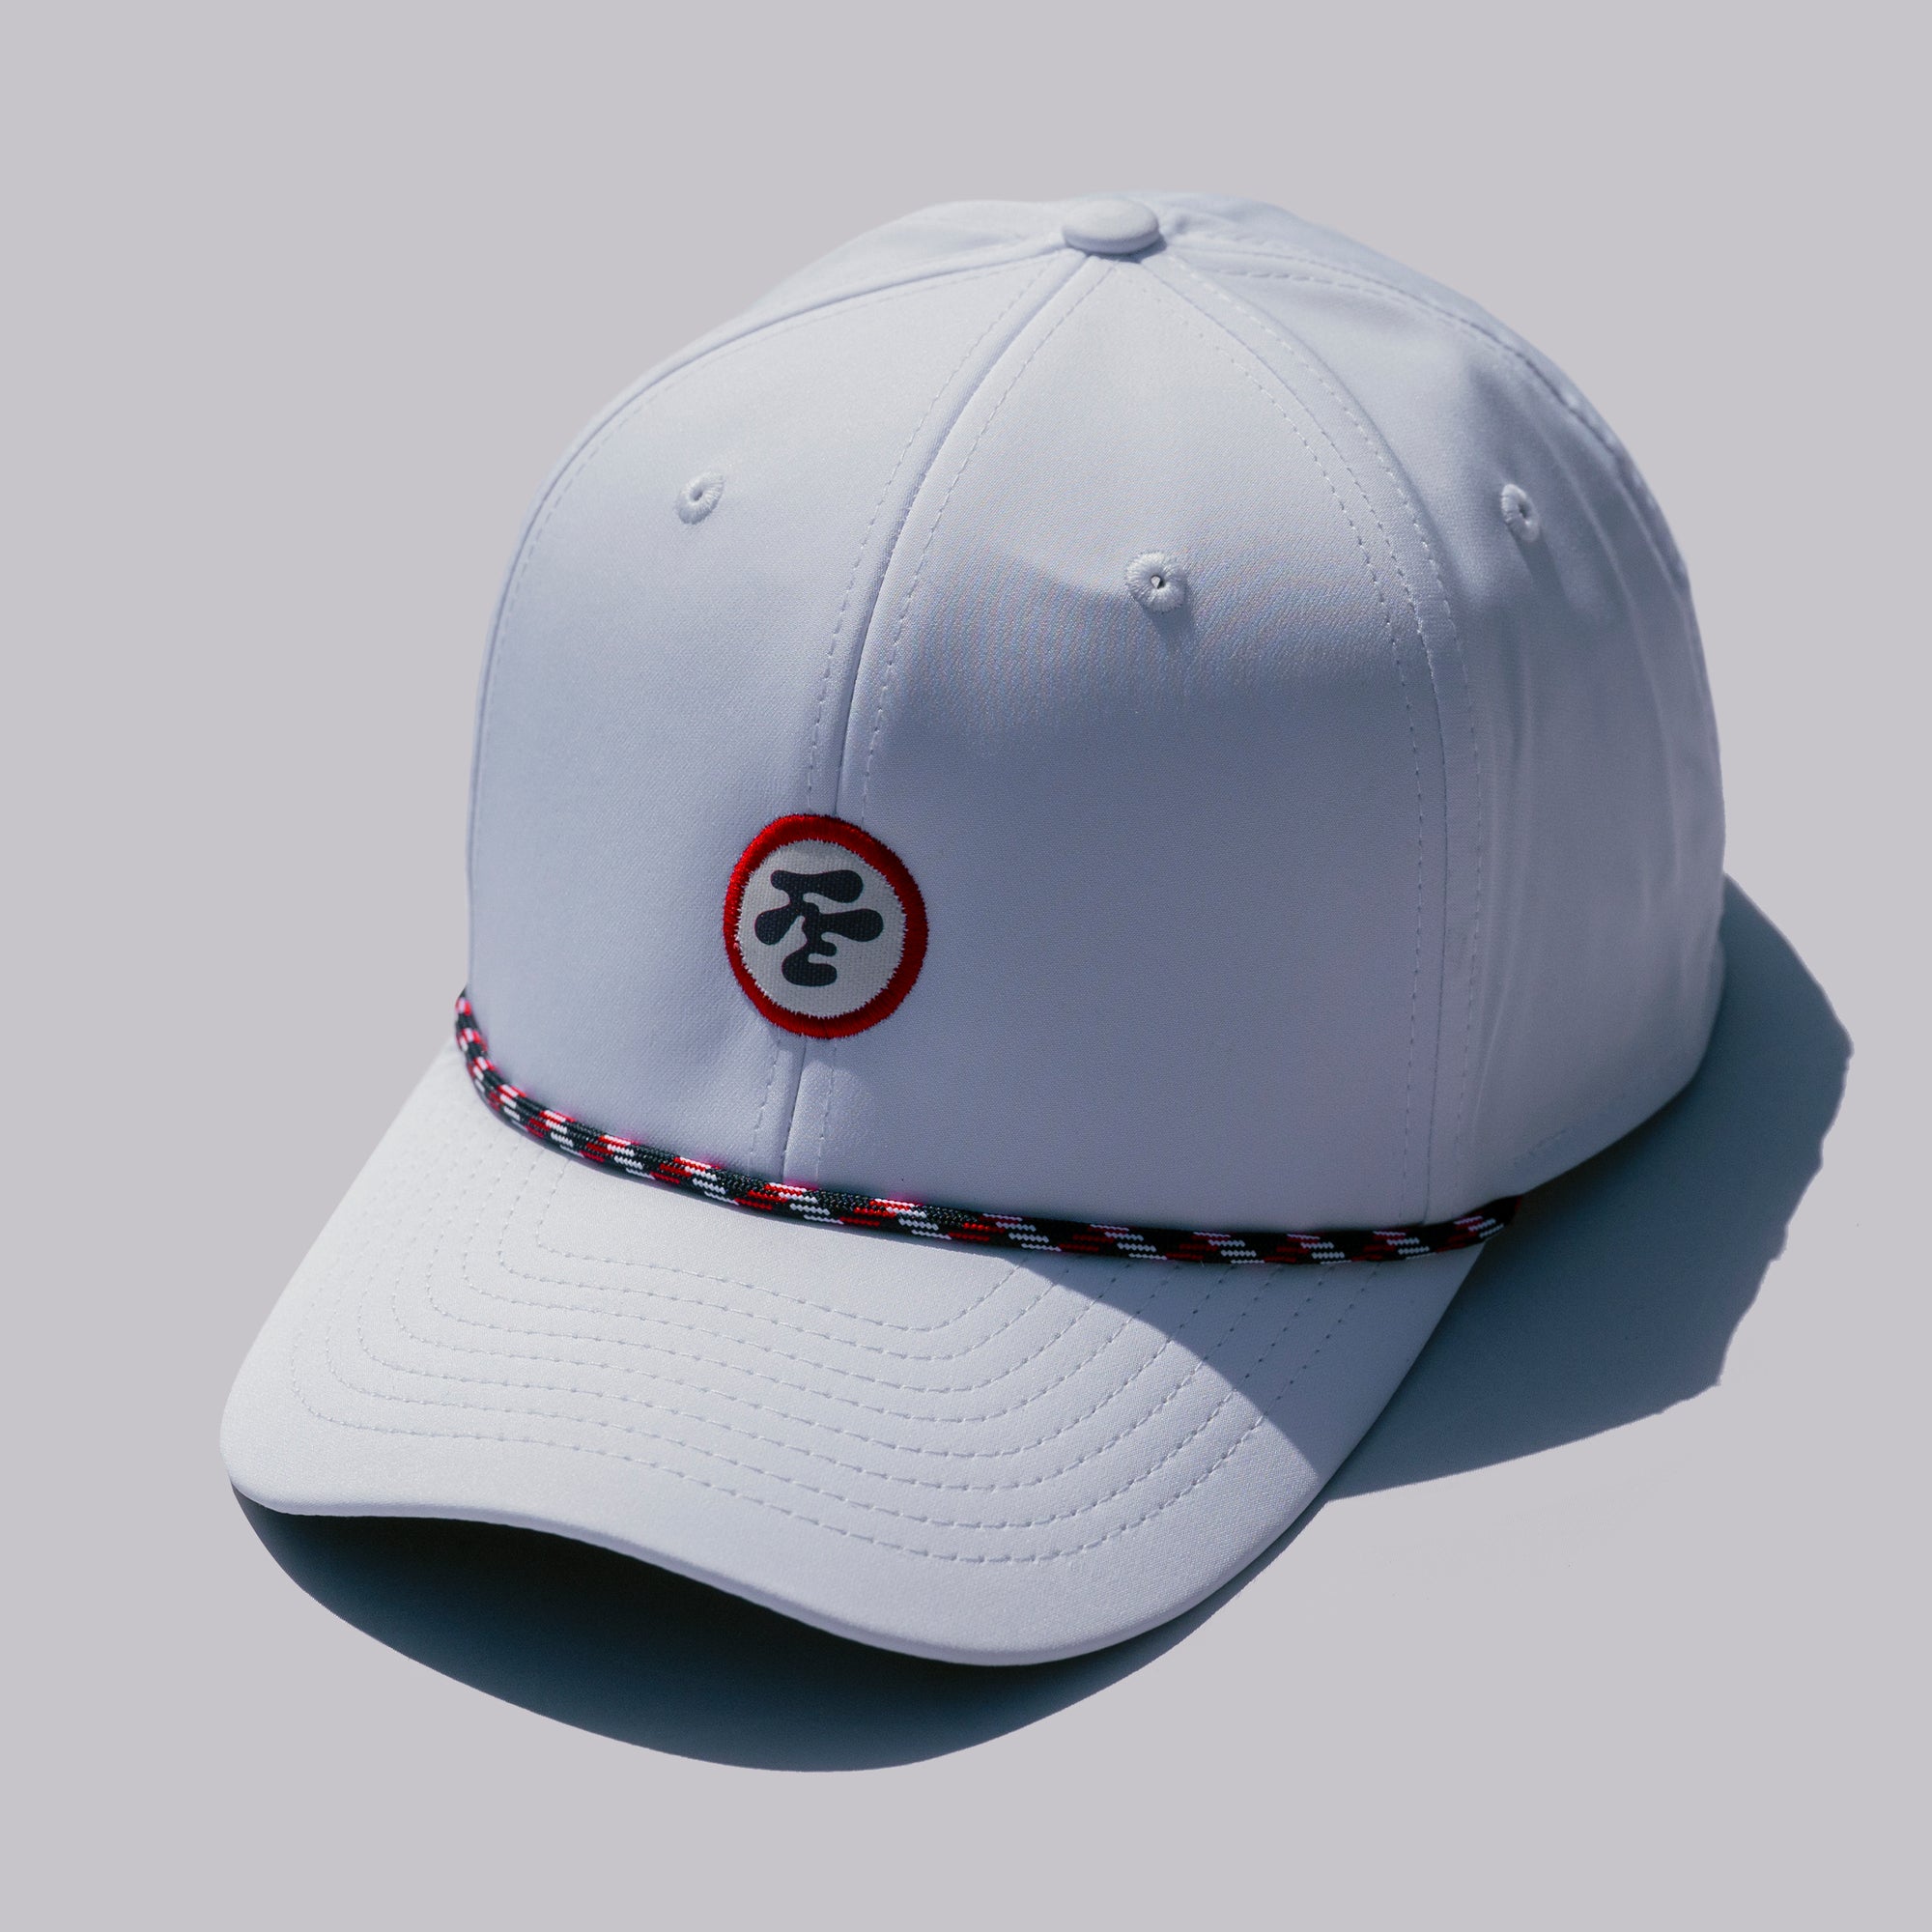 Fried Egg Golf Performance Rope Hat - White w/ Red, White, Blue Rope